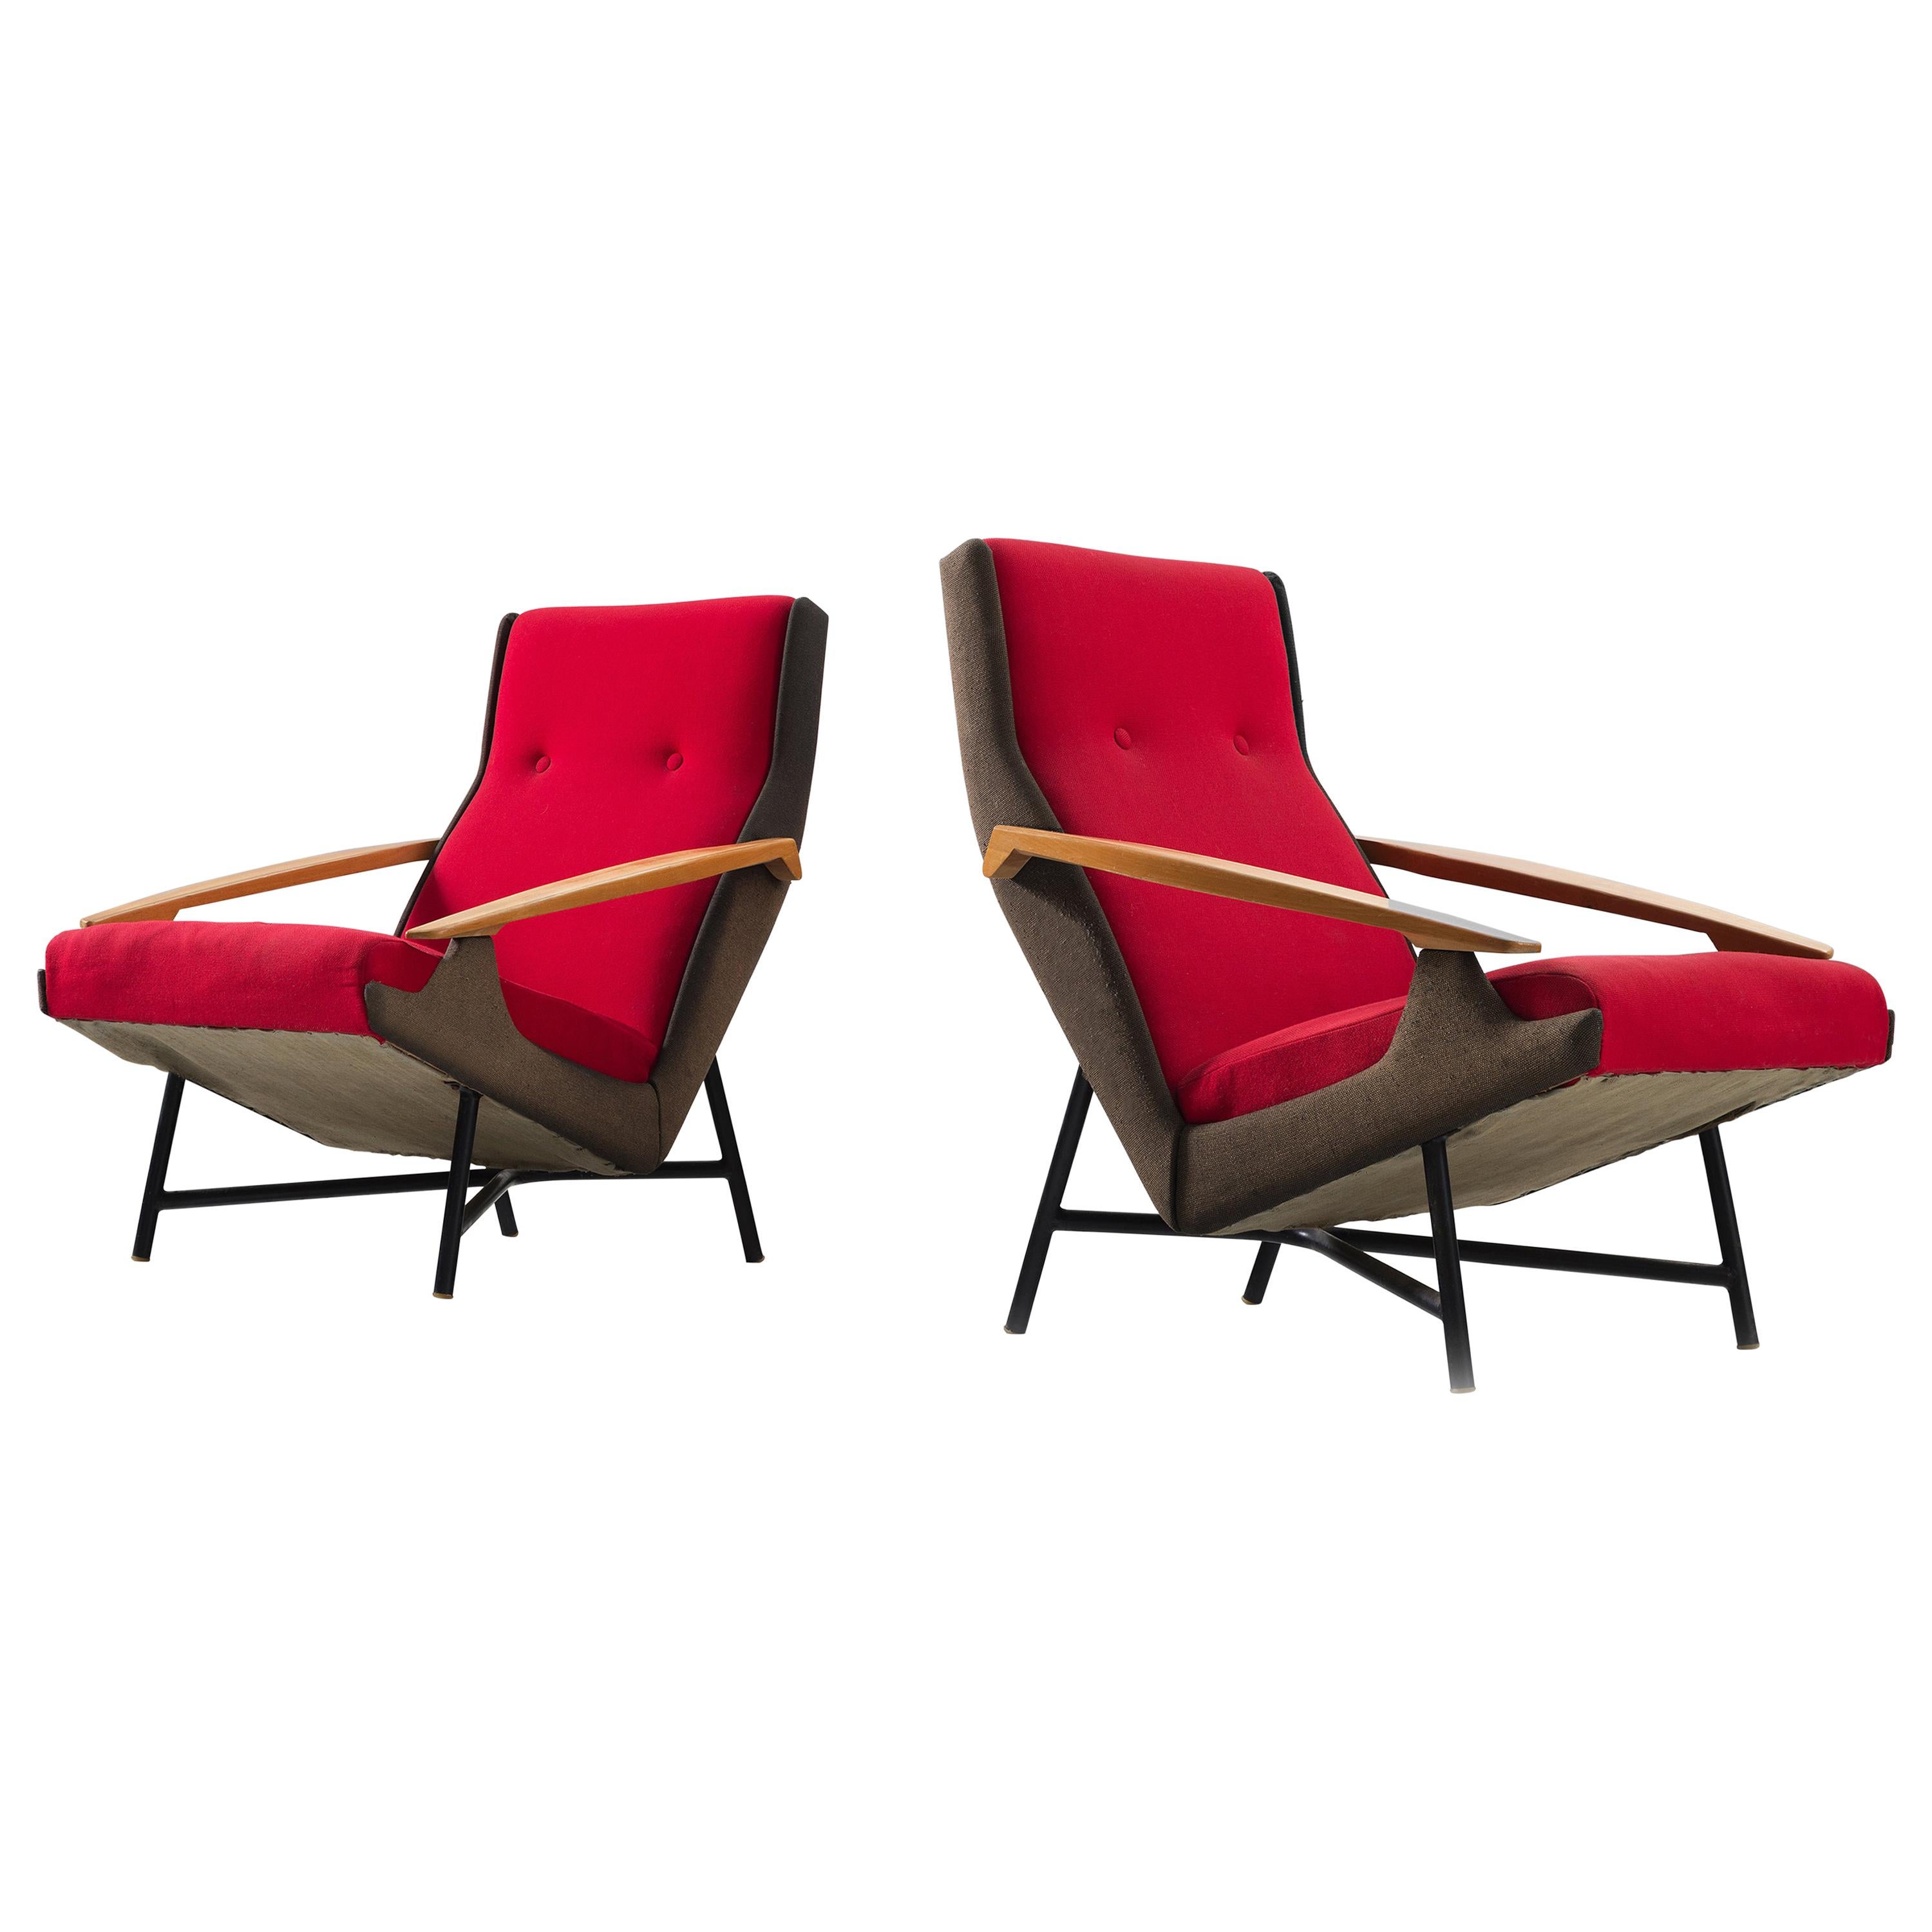 Claude Vassal Set of Two Lounge Chairs in Duo-Tone Upholstery